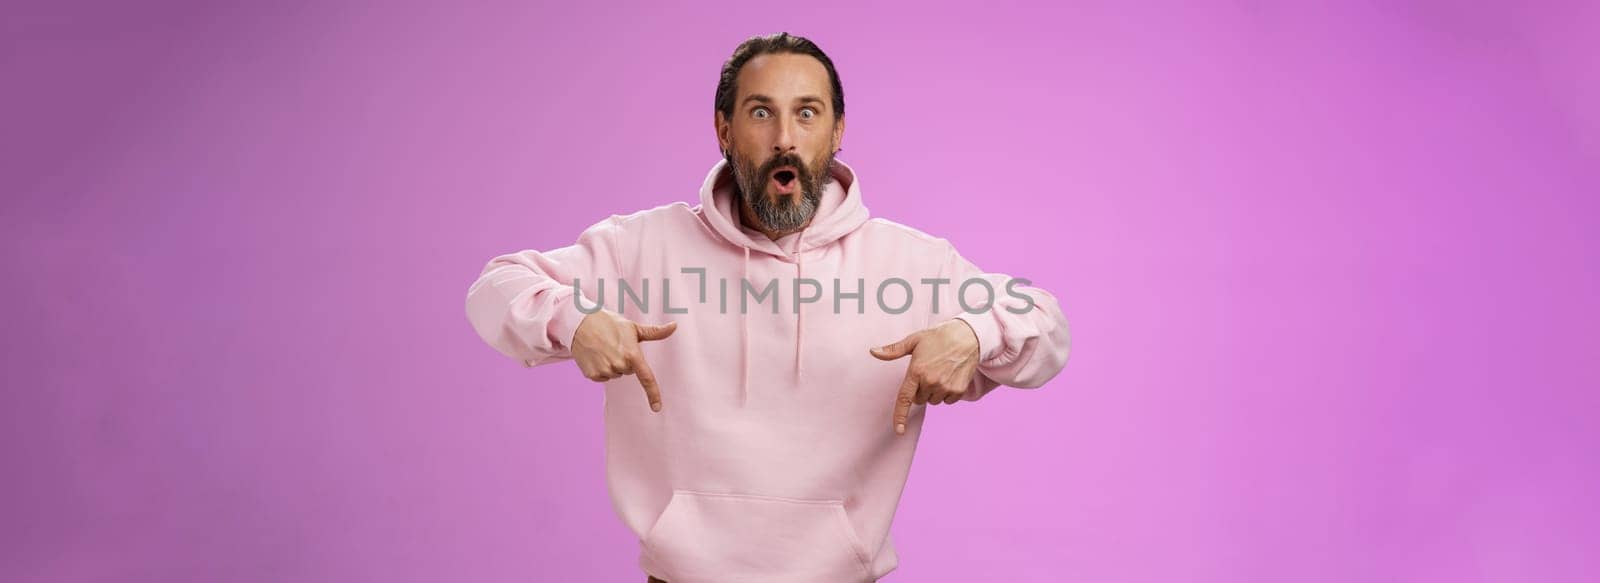 Impressed fascinated speechless dad bearded grey hair say wow widen eyes surprised folding lips amused curiously pointing down index fingers see super amazing advertisement, posing purple background.